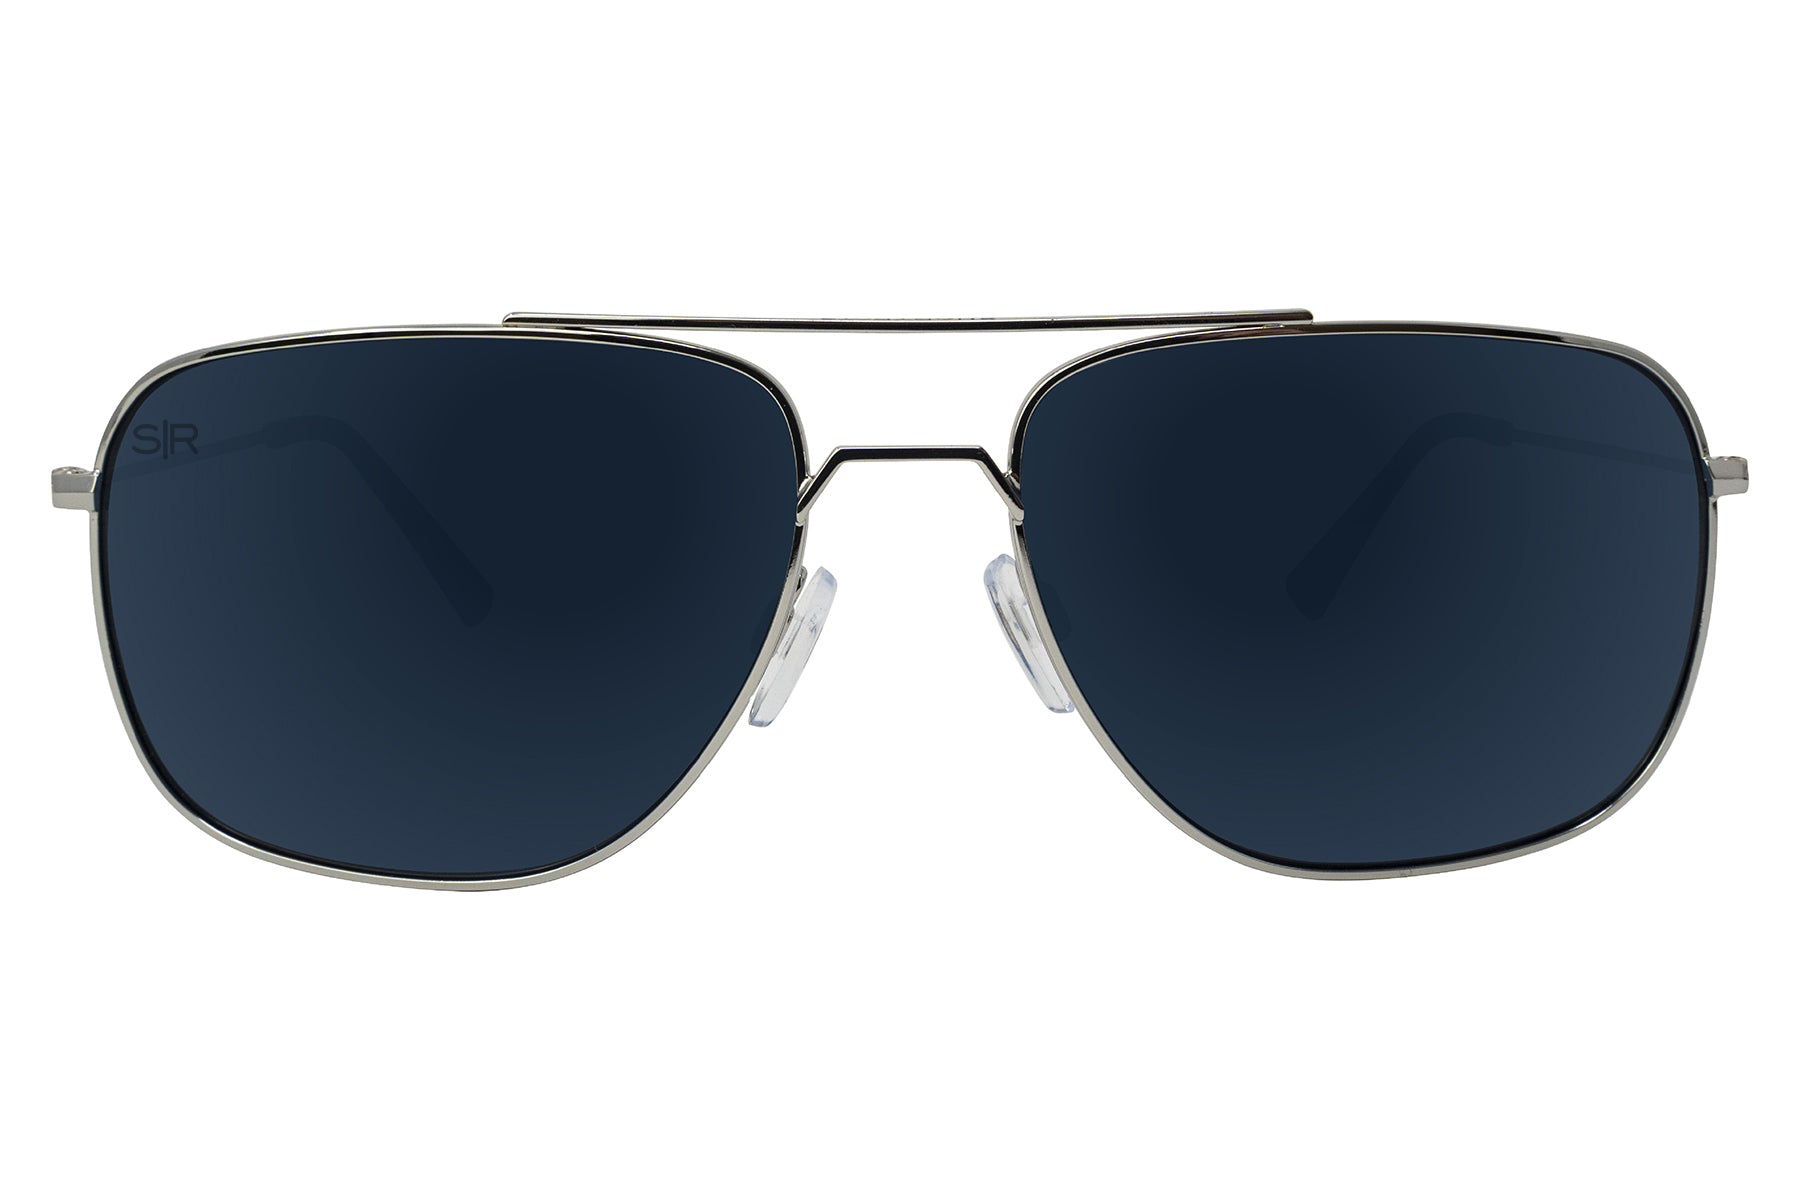 Navigator - Navy Silver Polarized Sunglasses | Men's Sunglasses | Christmas Gifts for Boyfriend | Gifts for Him | Unique Gifts for Husband | Shady